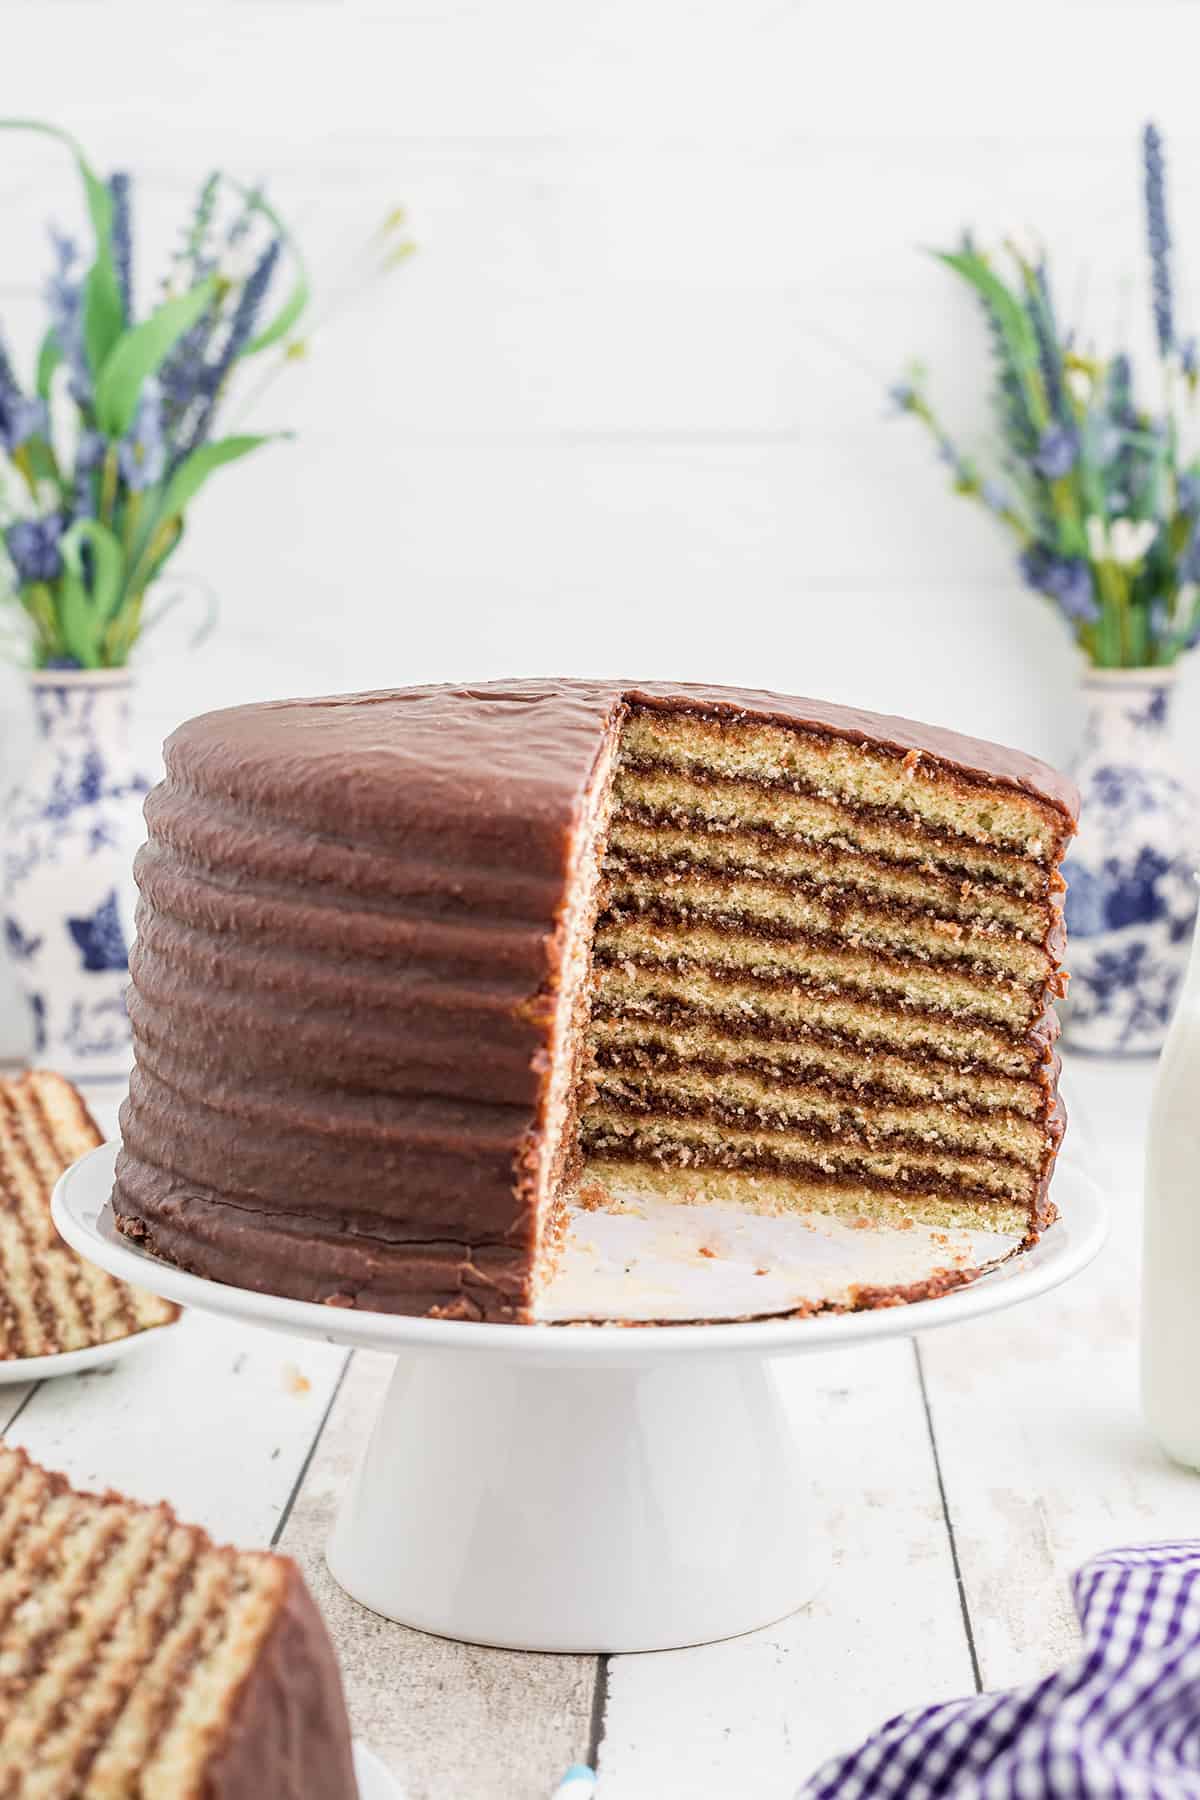 The sliced cake showing all the layers.